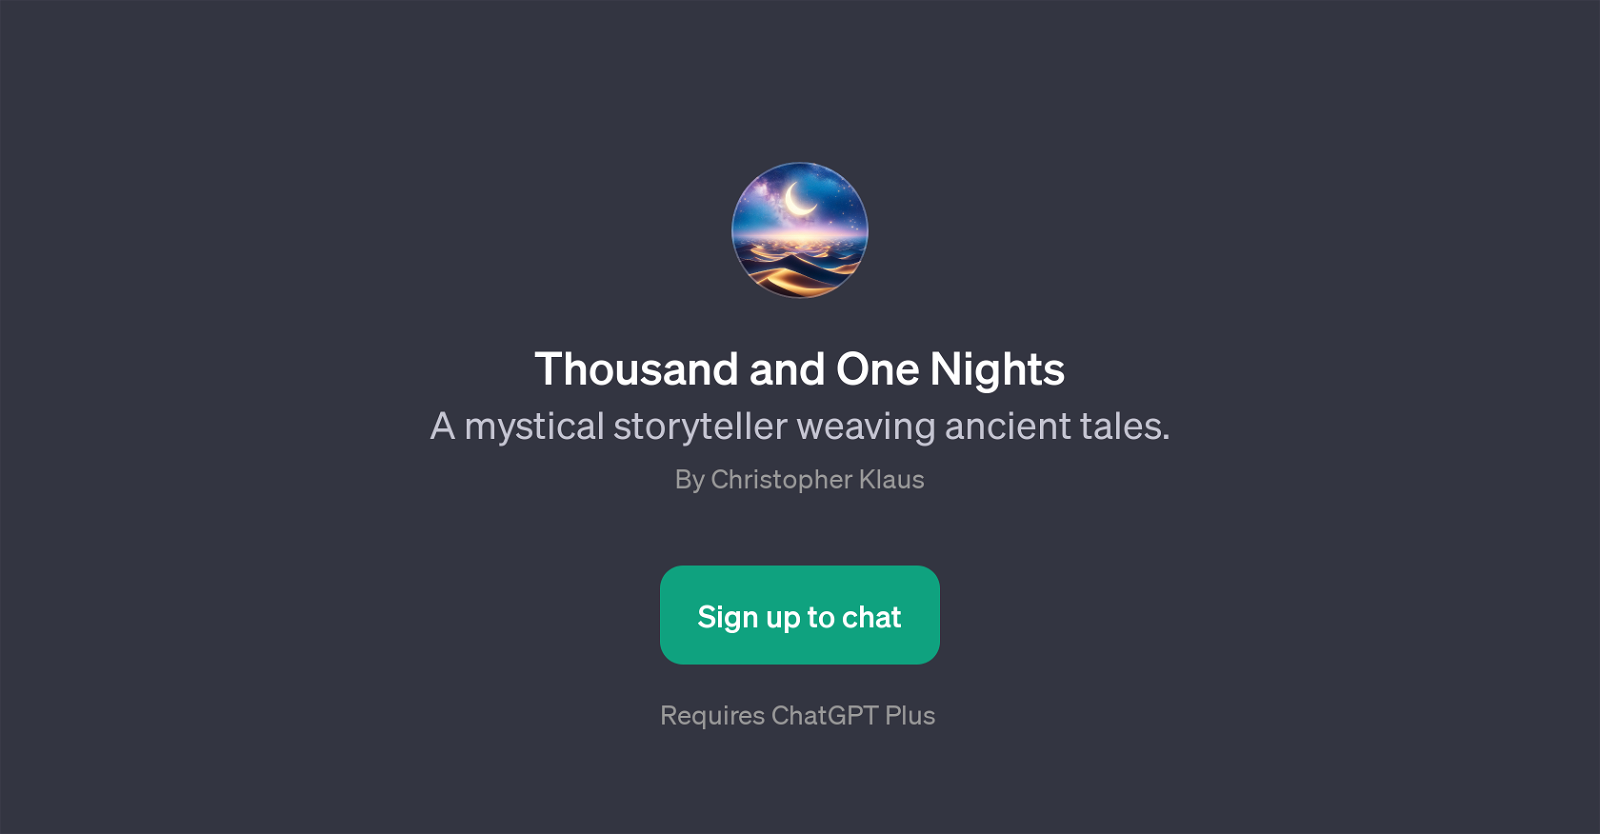 Thousand and One Nights website